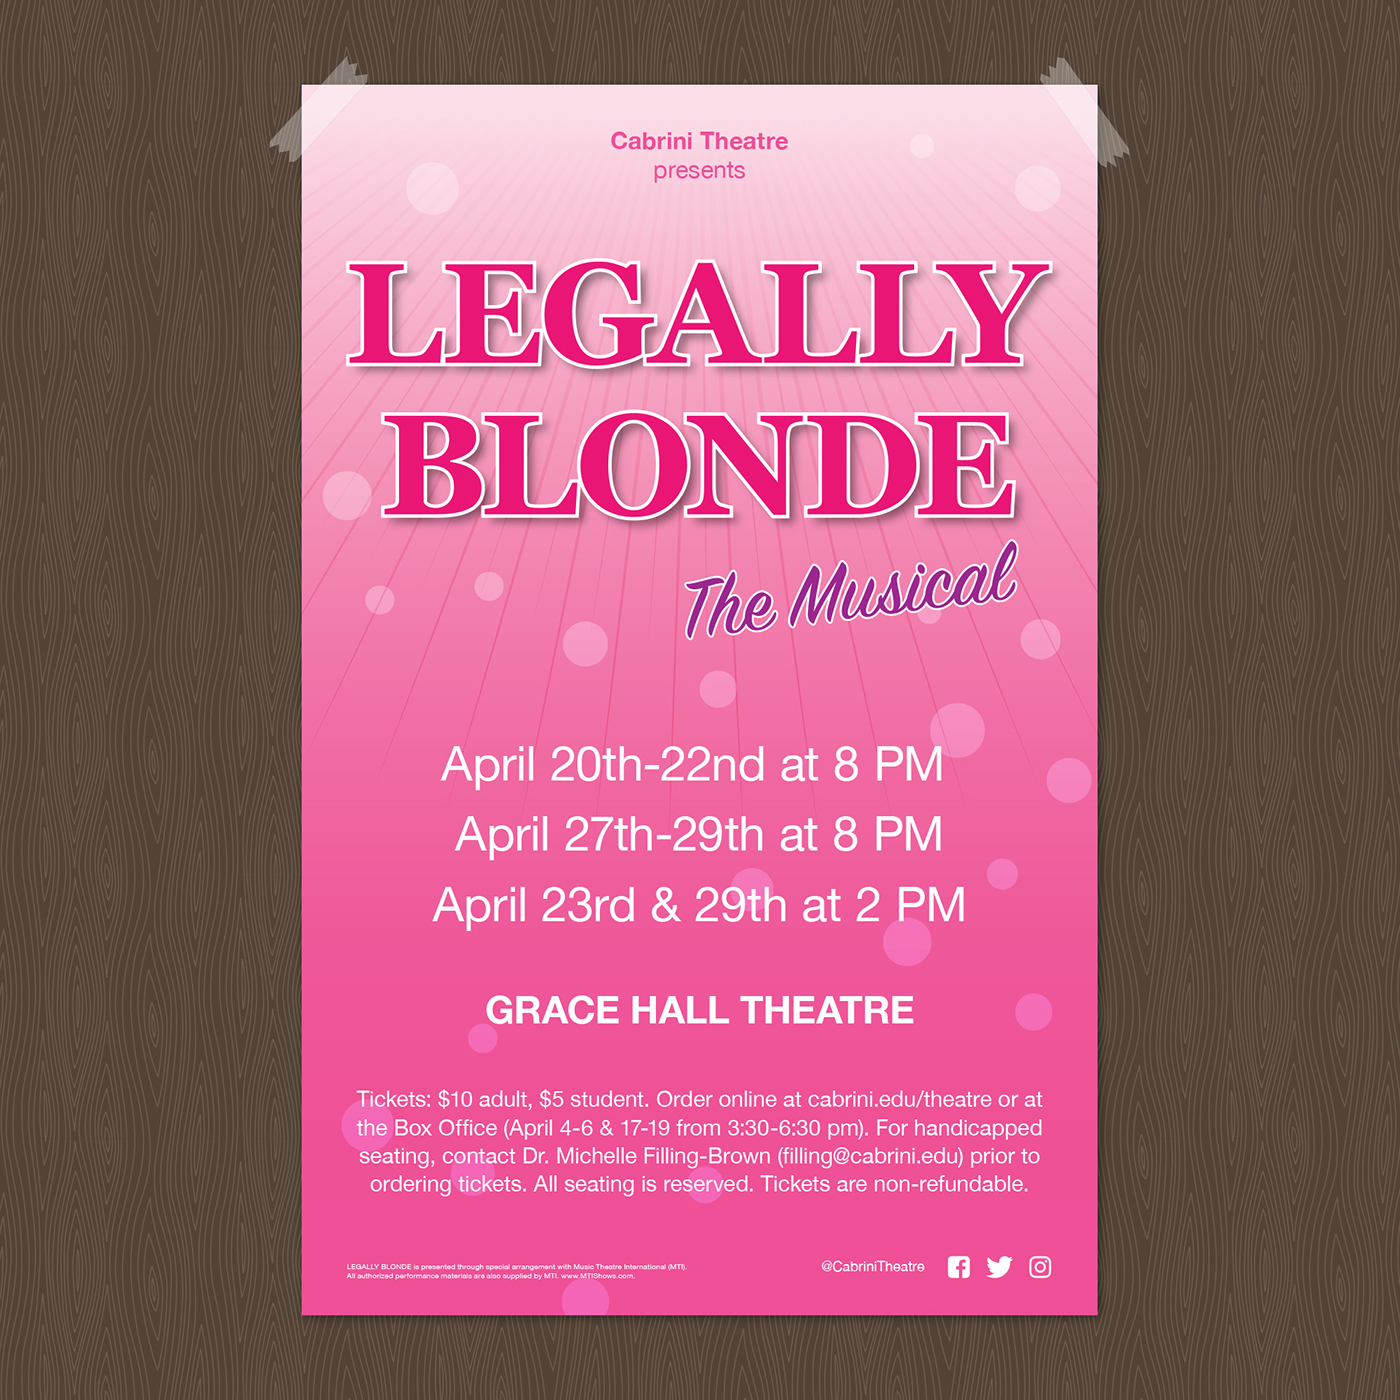 Theatre theater  pplaybill poster social media legally blonde